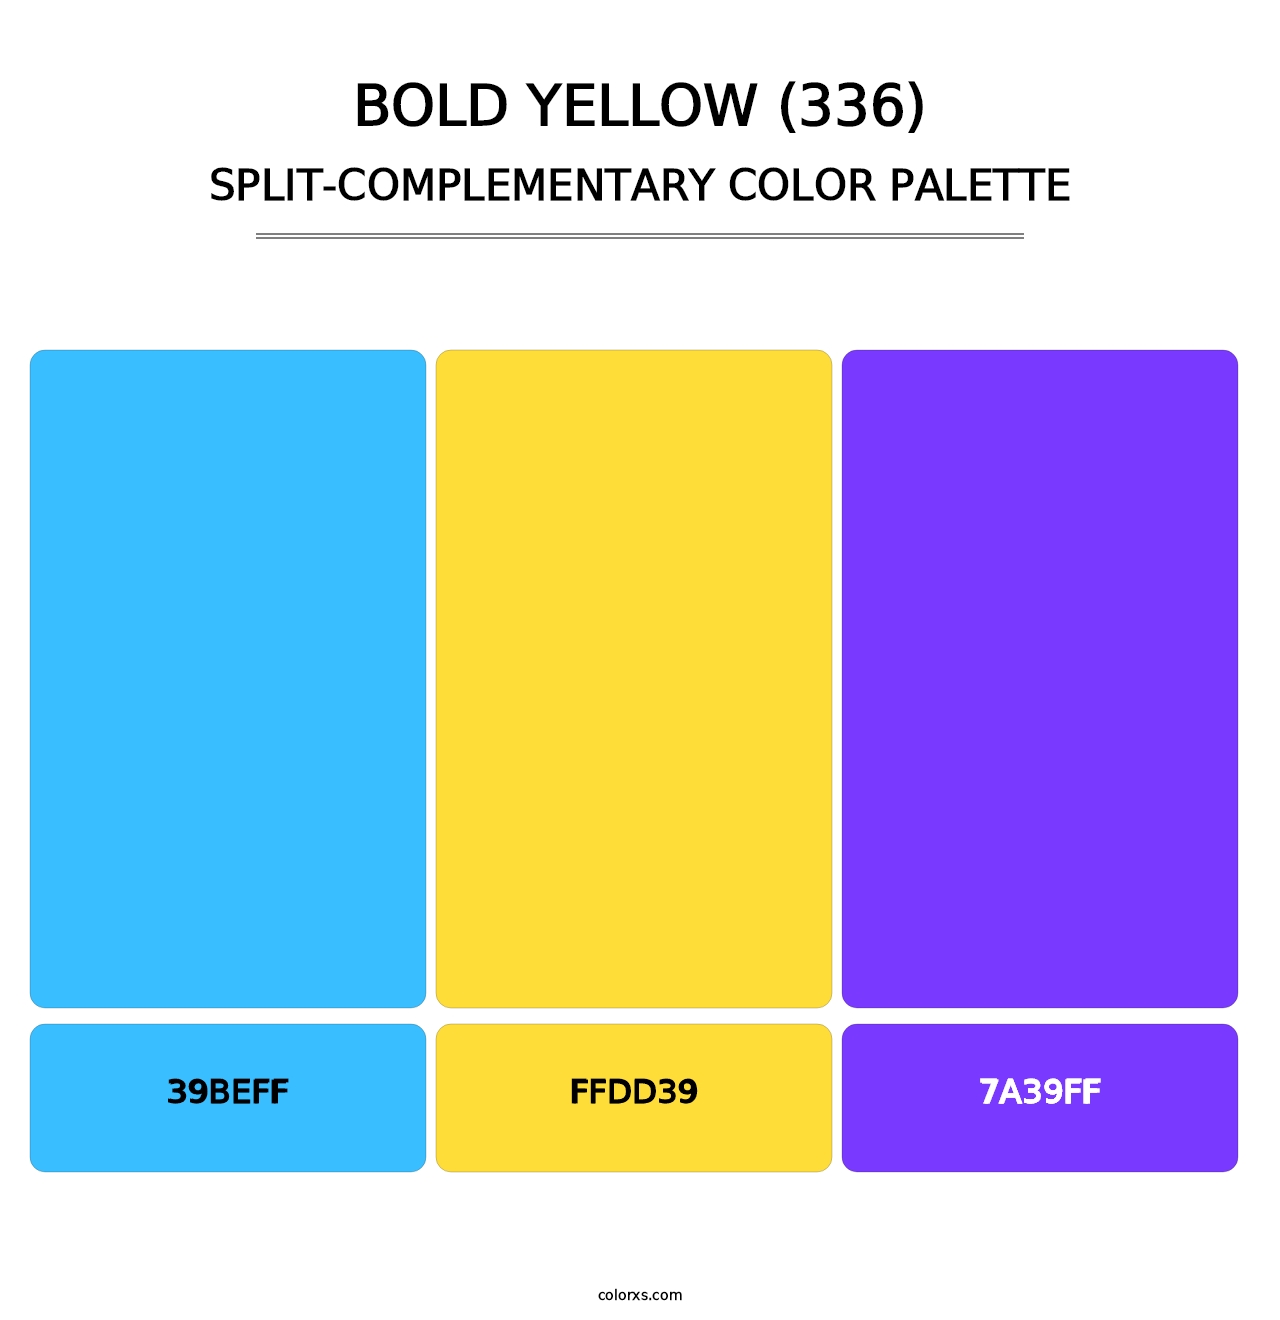 Bold Yellow (336) - Split-Complementary Color Palette